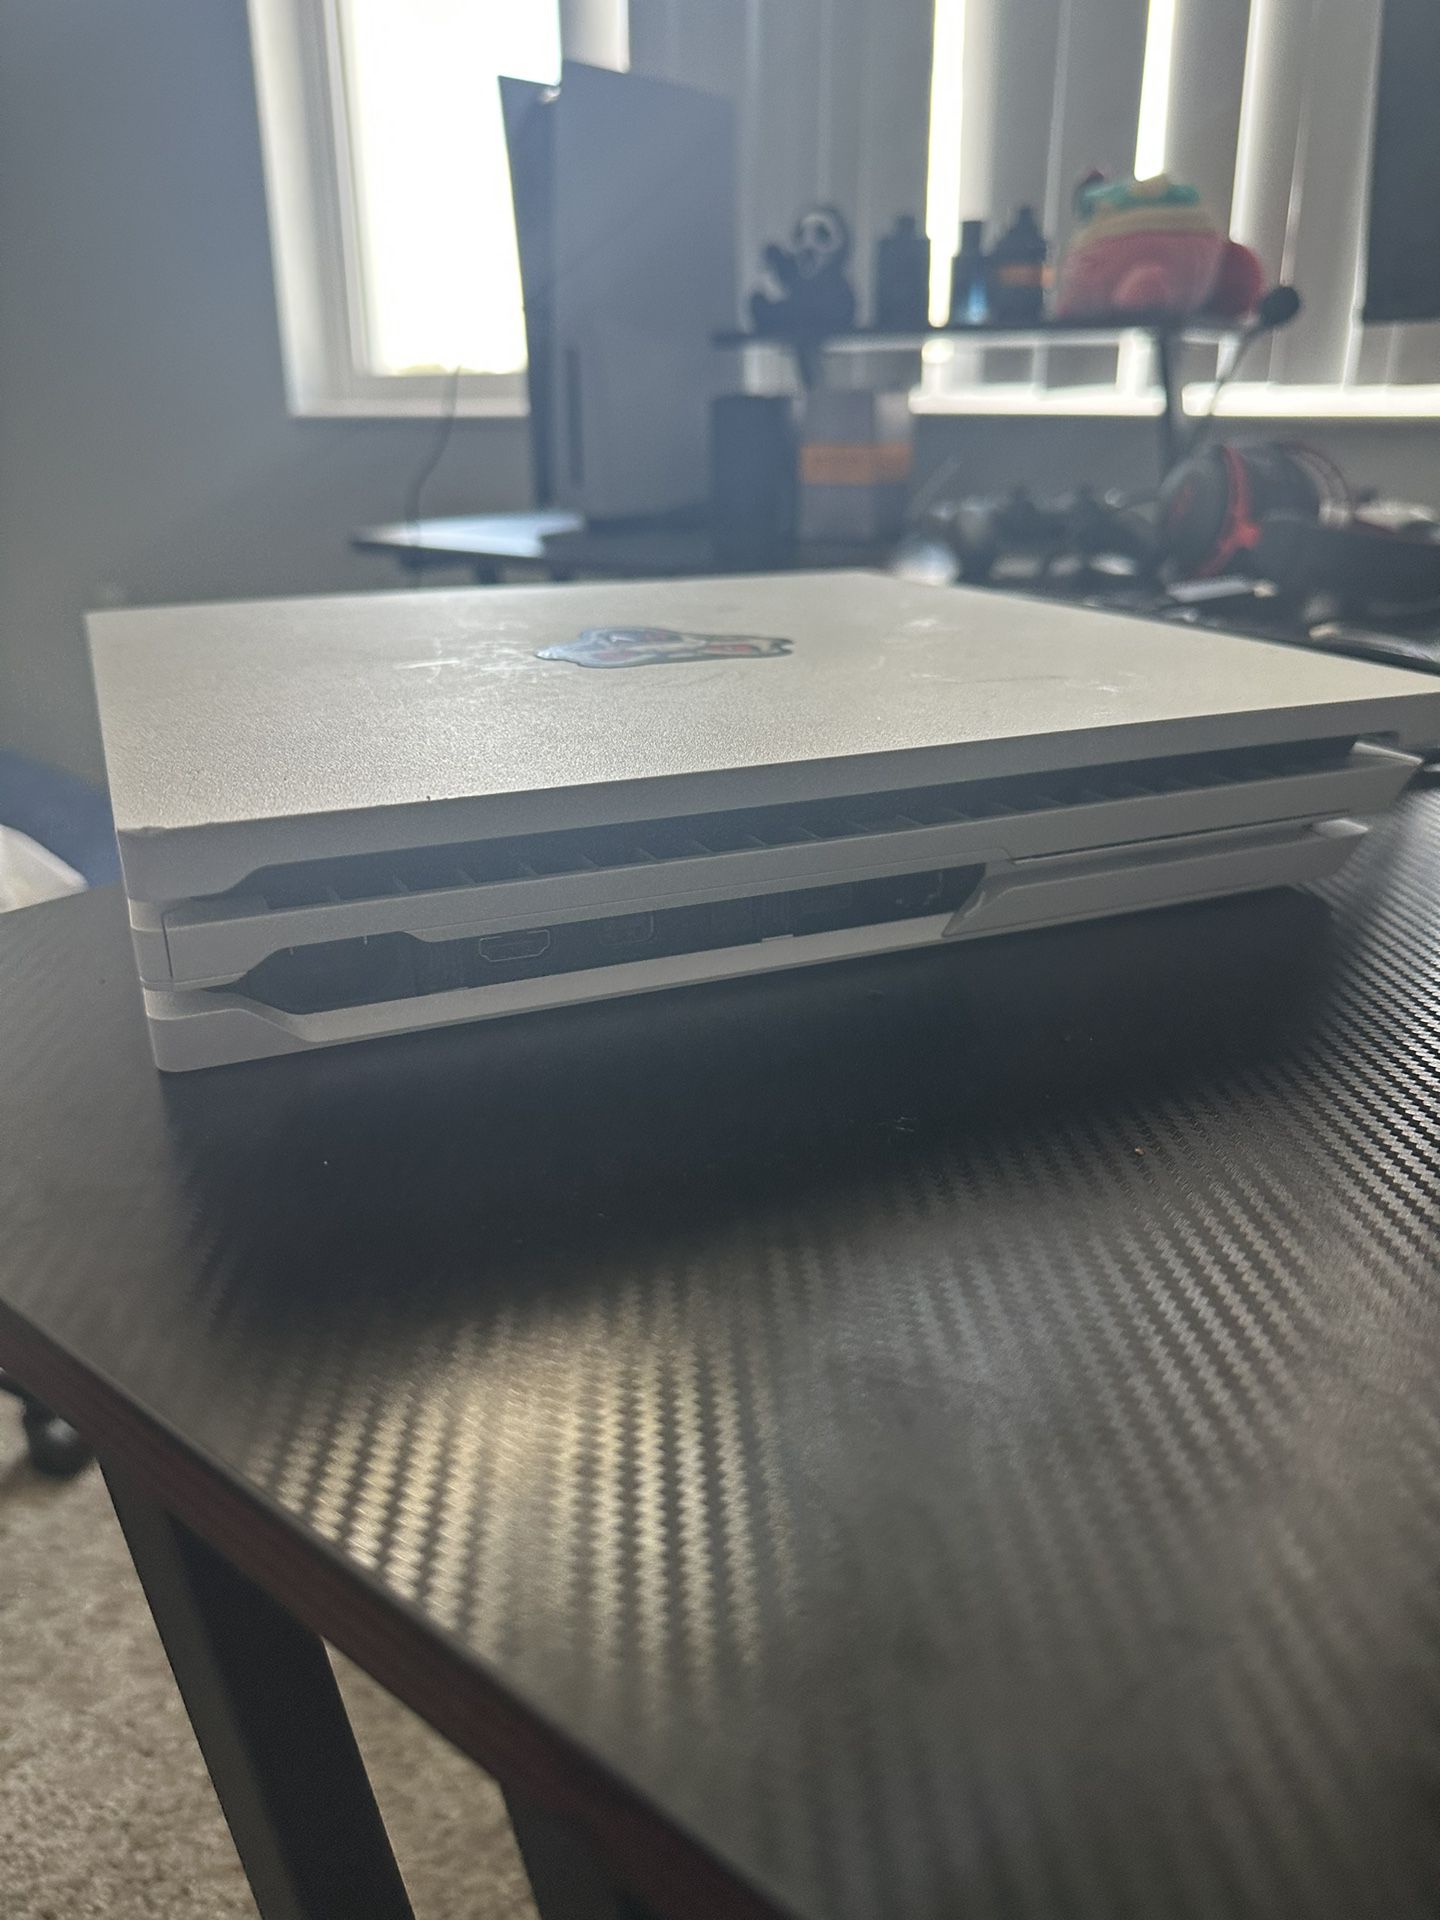 PS4 Pro Cleaned By Professional for Sale in Miami, FL - OfferUp